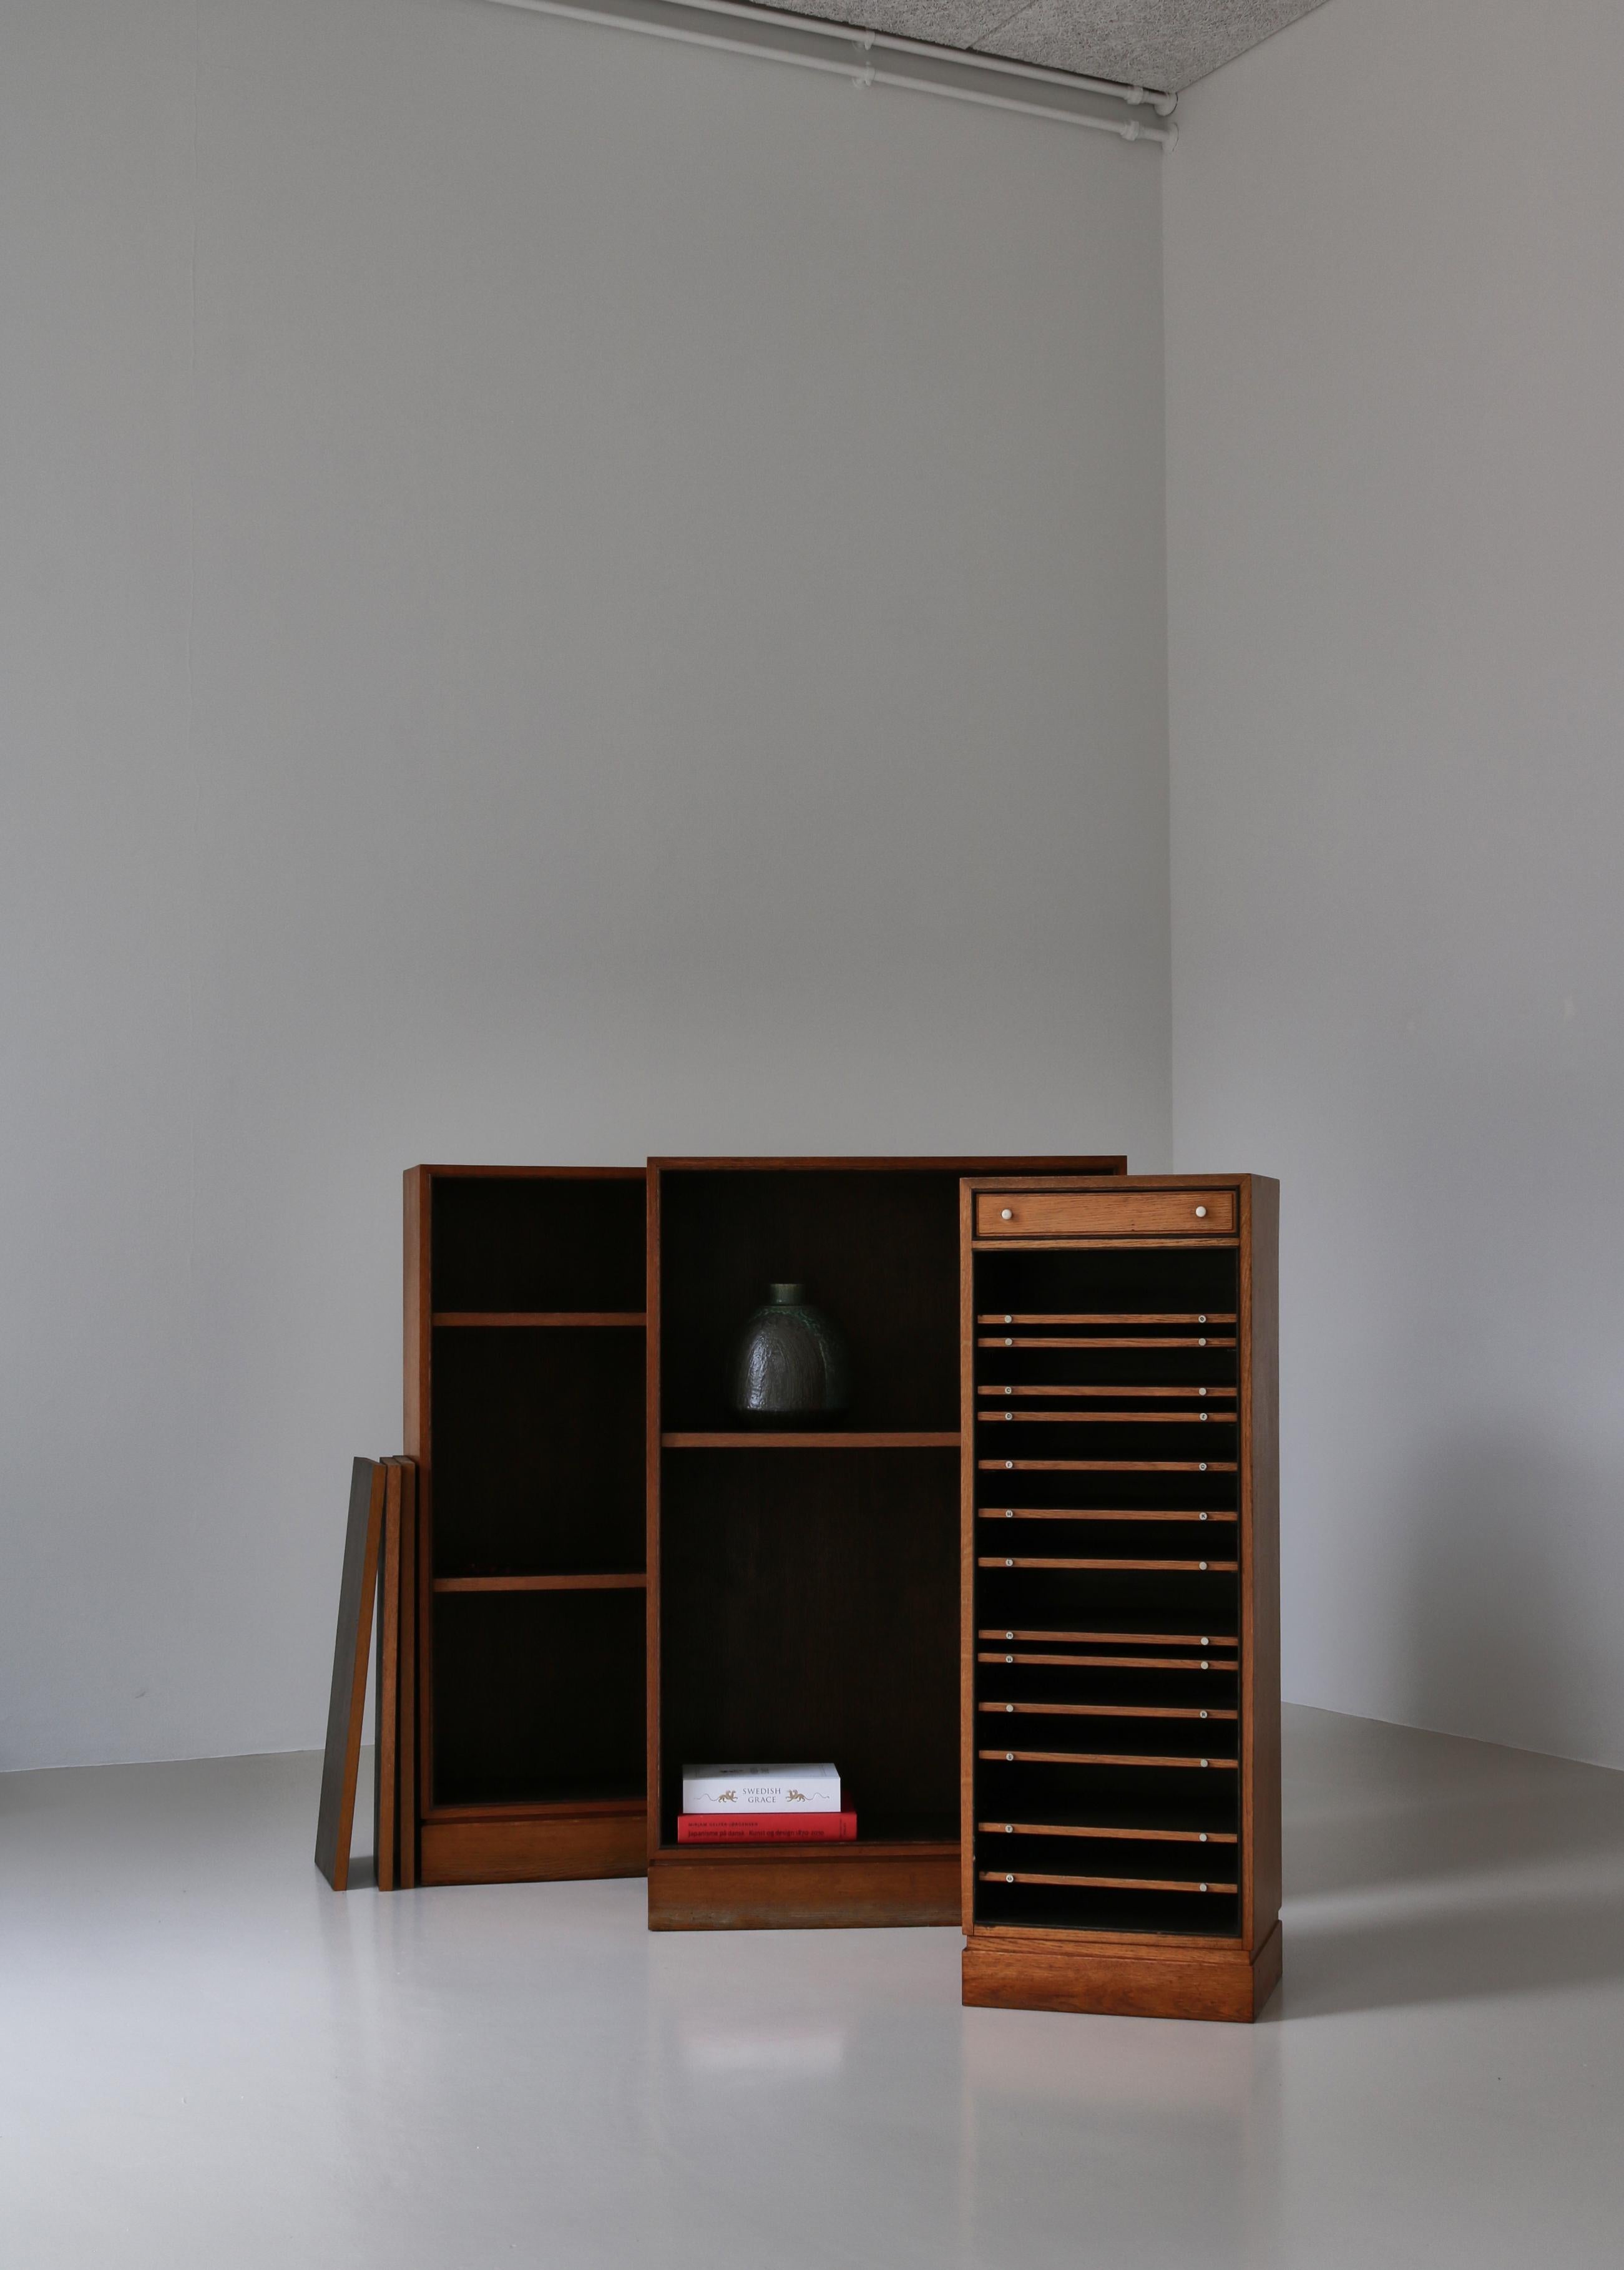 A pair of beautiful oak bookcases made by Danish cabinetmaker I.P. Mørck, Copenhagen in the 1930s. The bookcases are simple and functional with adjustable shelves. Elegant handmade profiles in stained oak.

I.P. Mørck was one of the most renowned